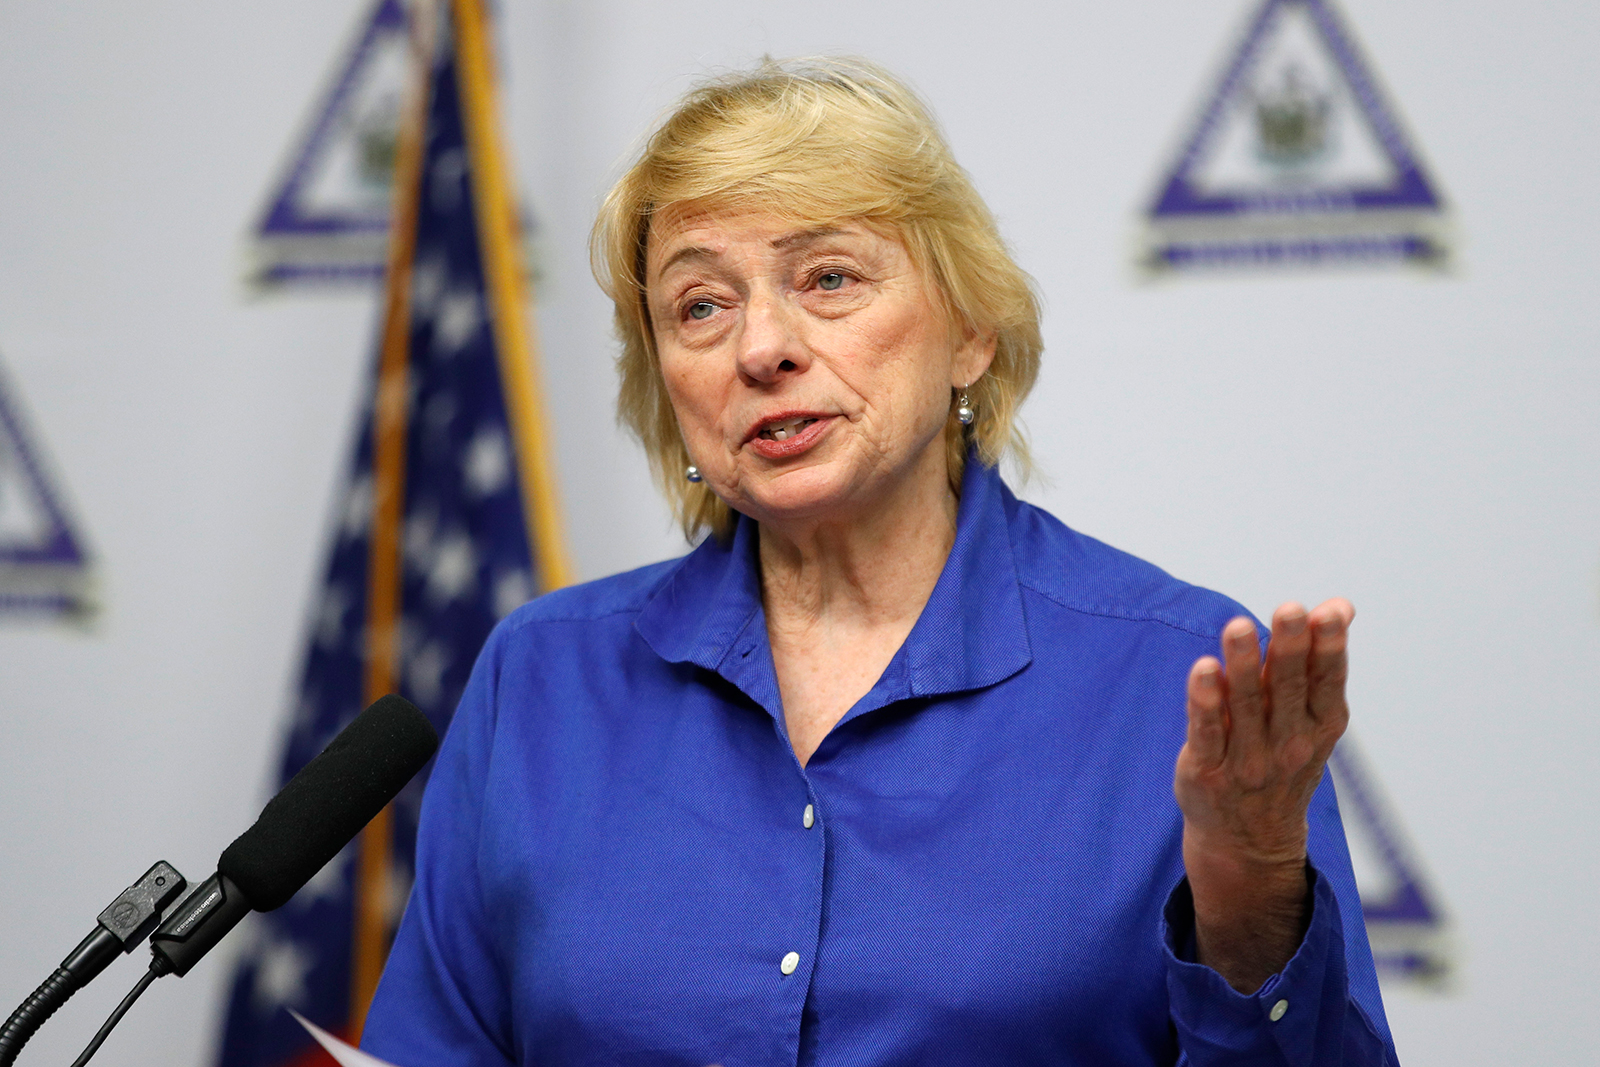 Maine Gov. Janet Mills speaks at a news conference where she announced new plans for the stay-at-home order on April 28, in Augusta, Maine.